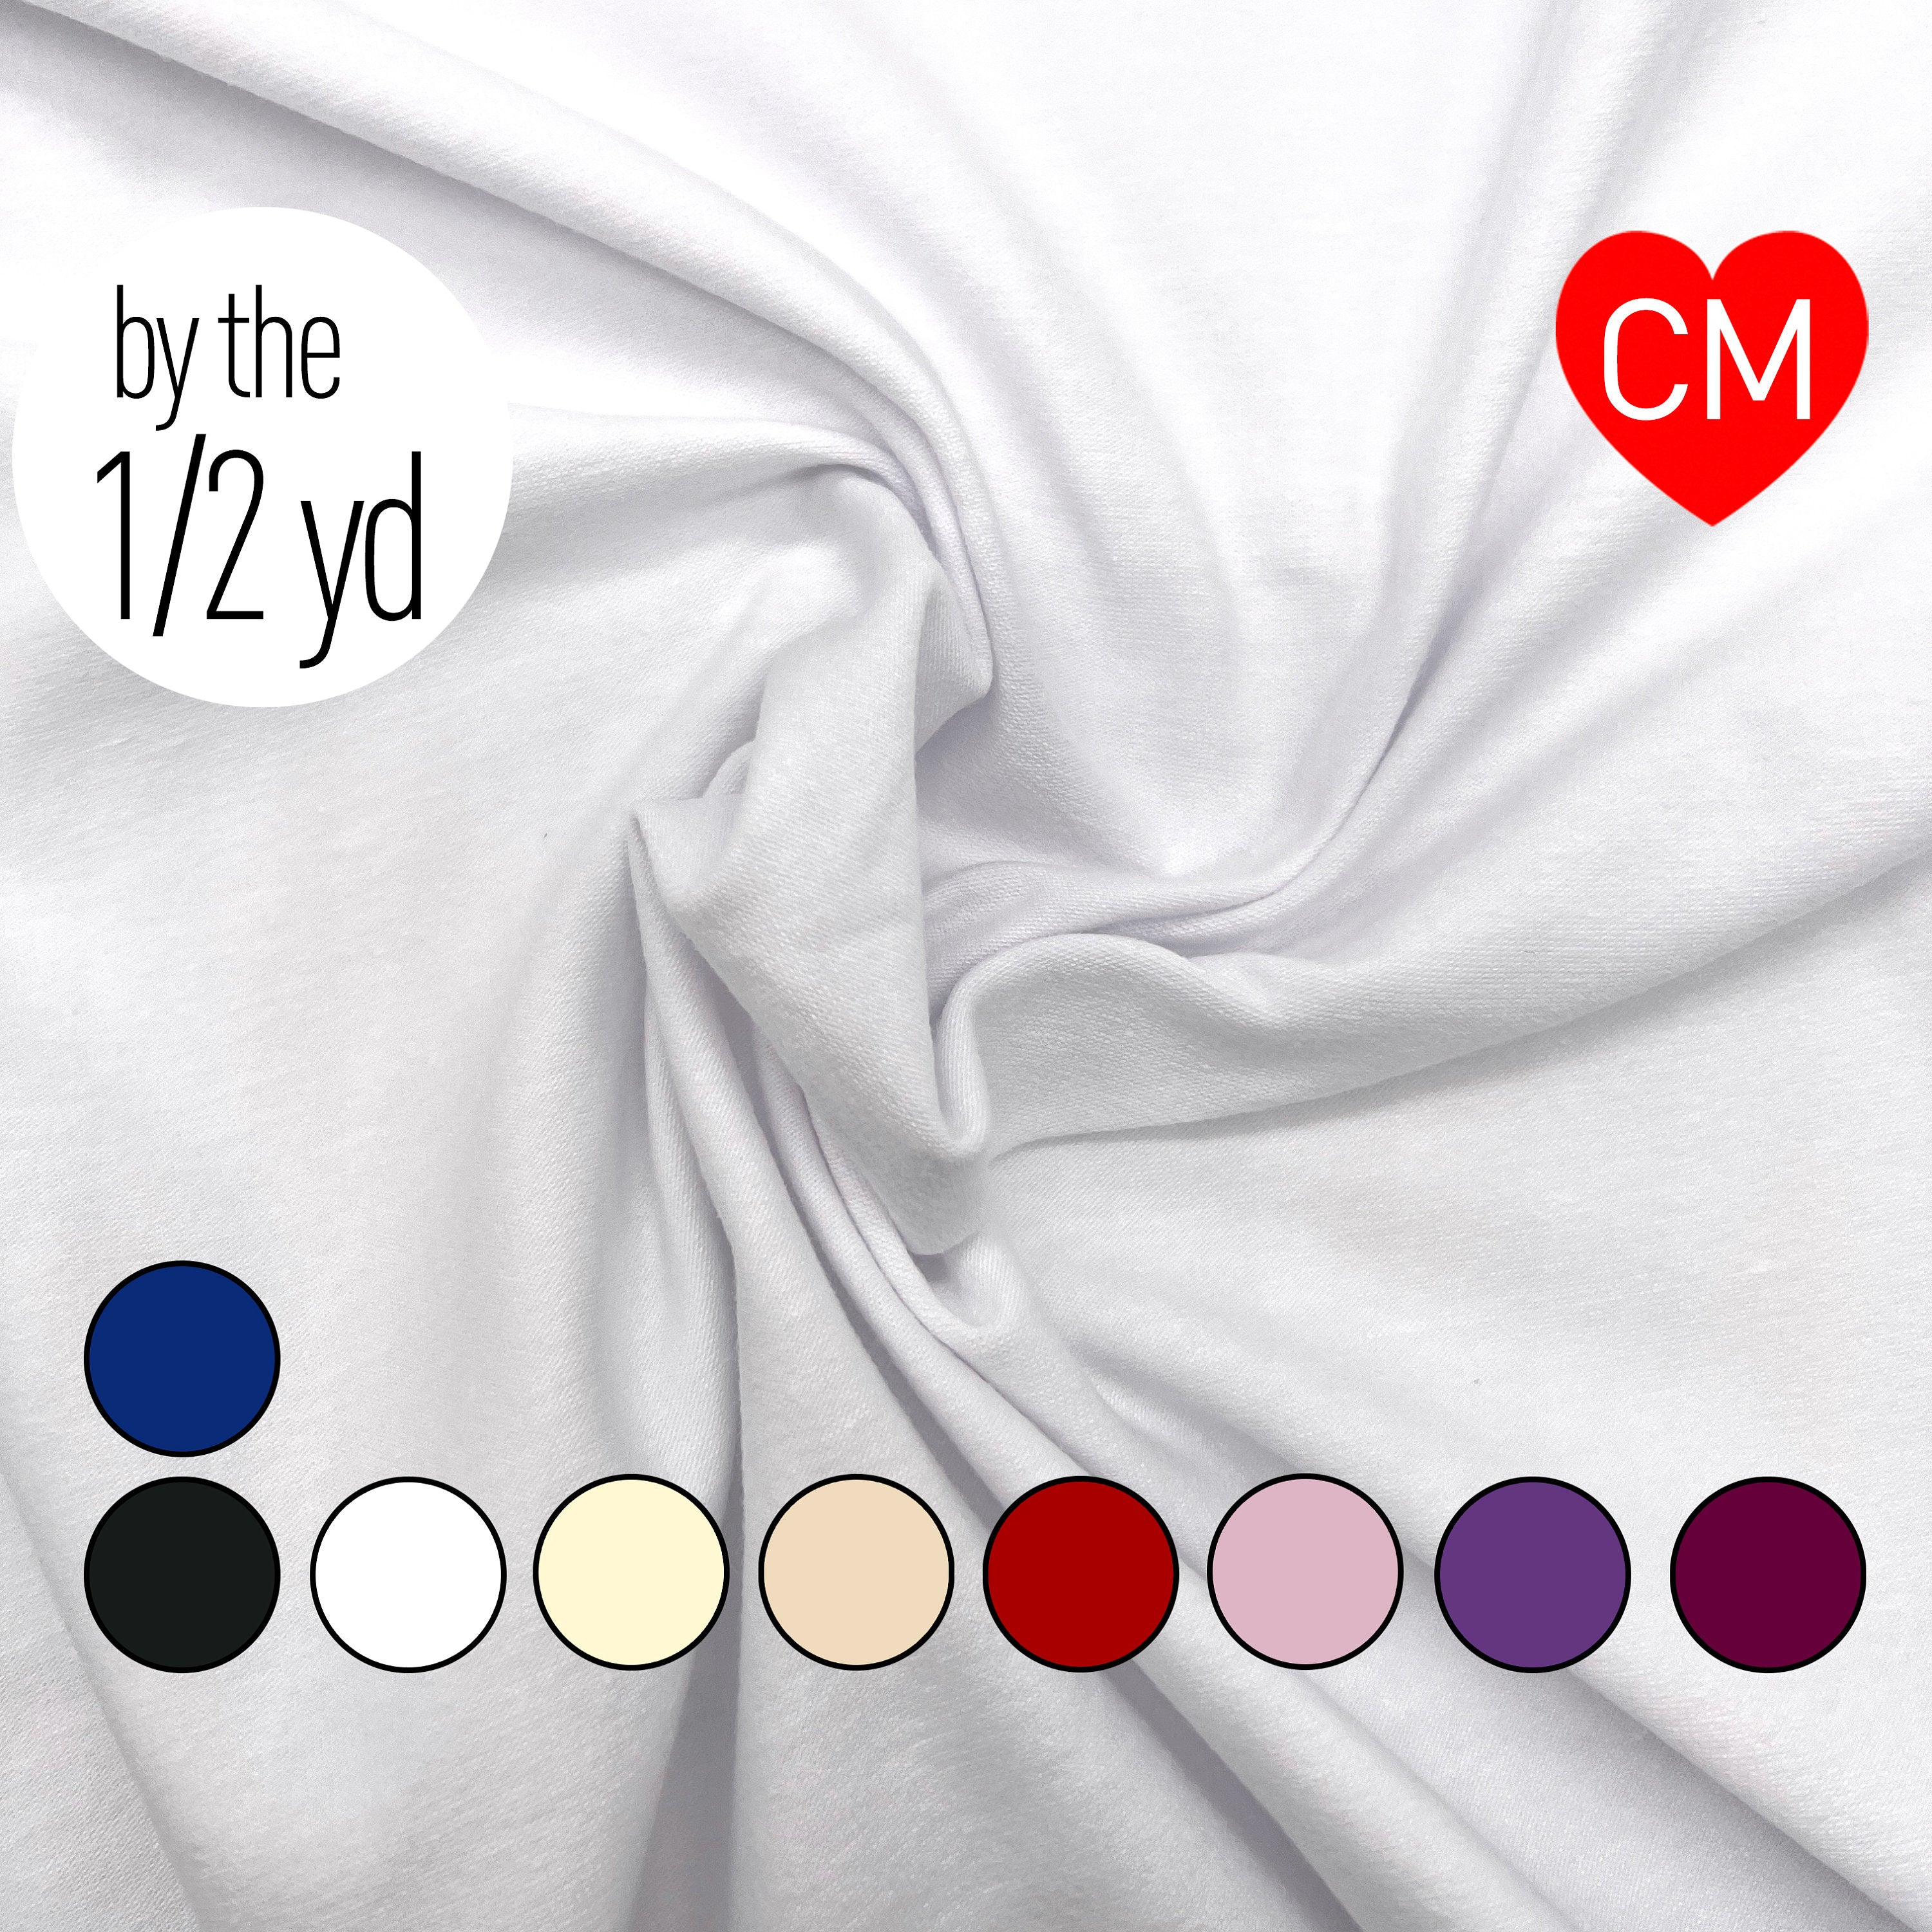 Cotton Spandex Knit Jersey Fabric, by the 1/2 Yard